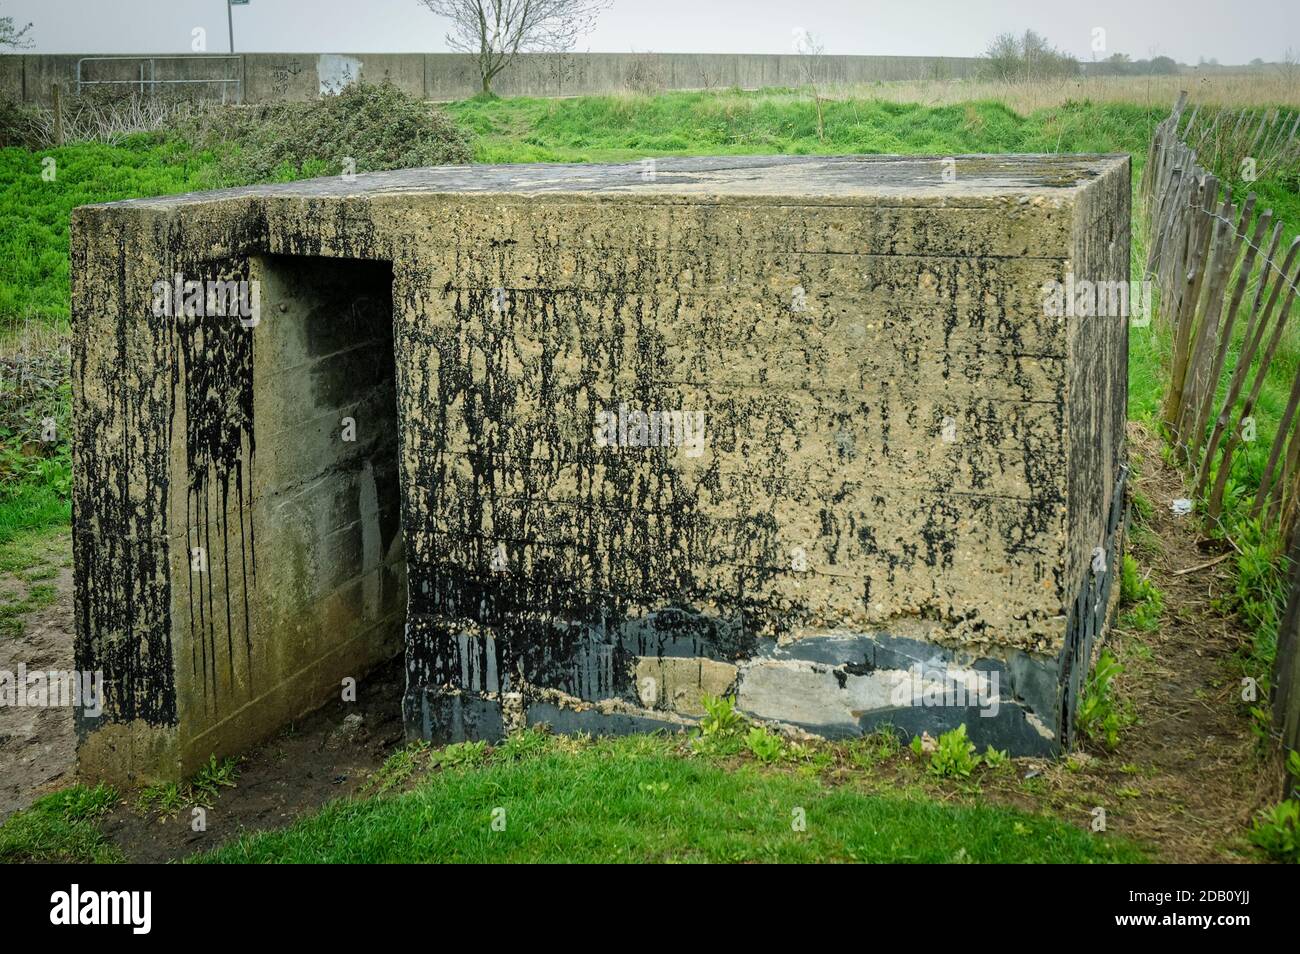 Pillbox or Bunker made around 1940 to defend the United Kingdom against possible enemy invasion, Coalhouse Fort, East Tilbury, Essex, England Stock Photo